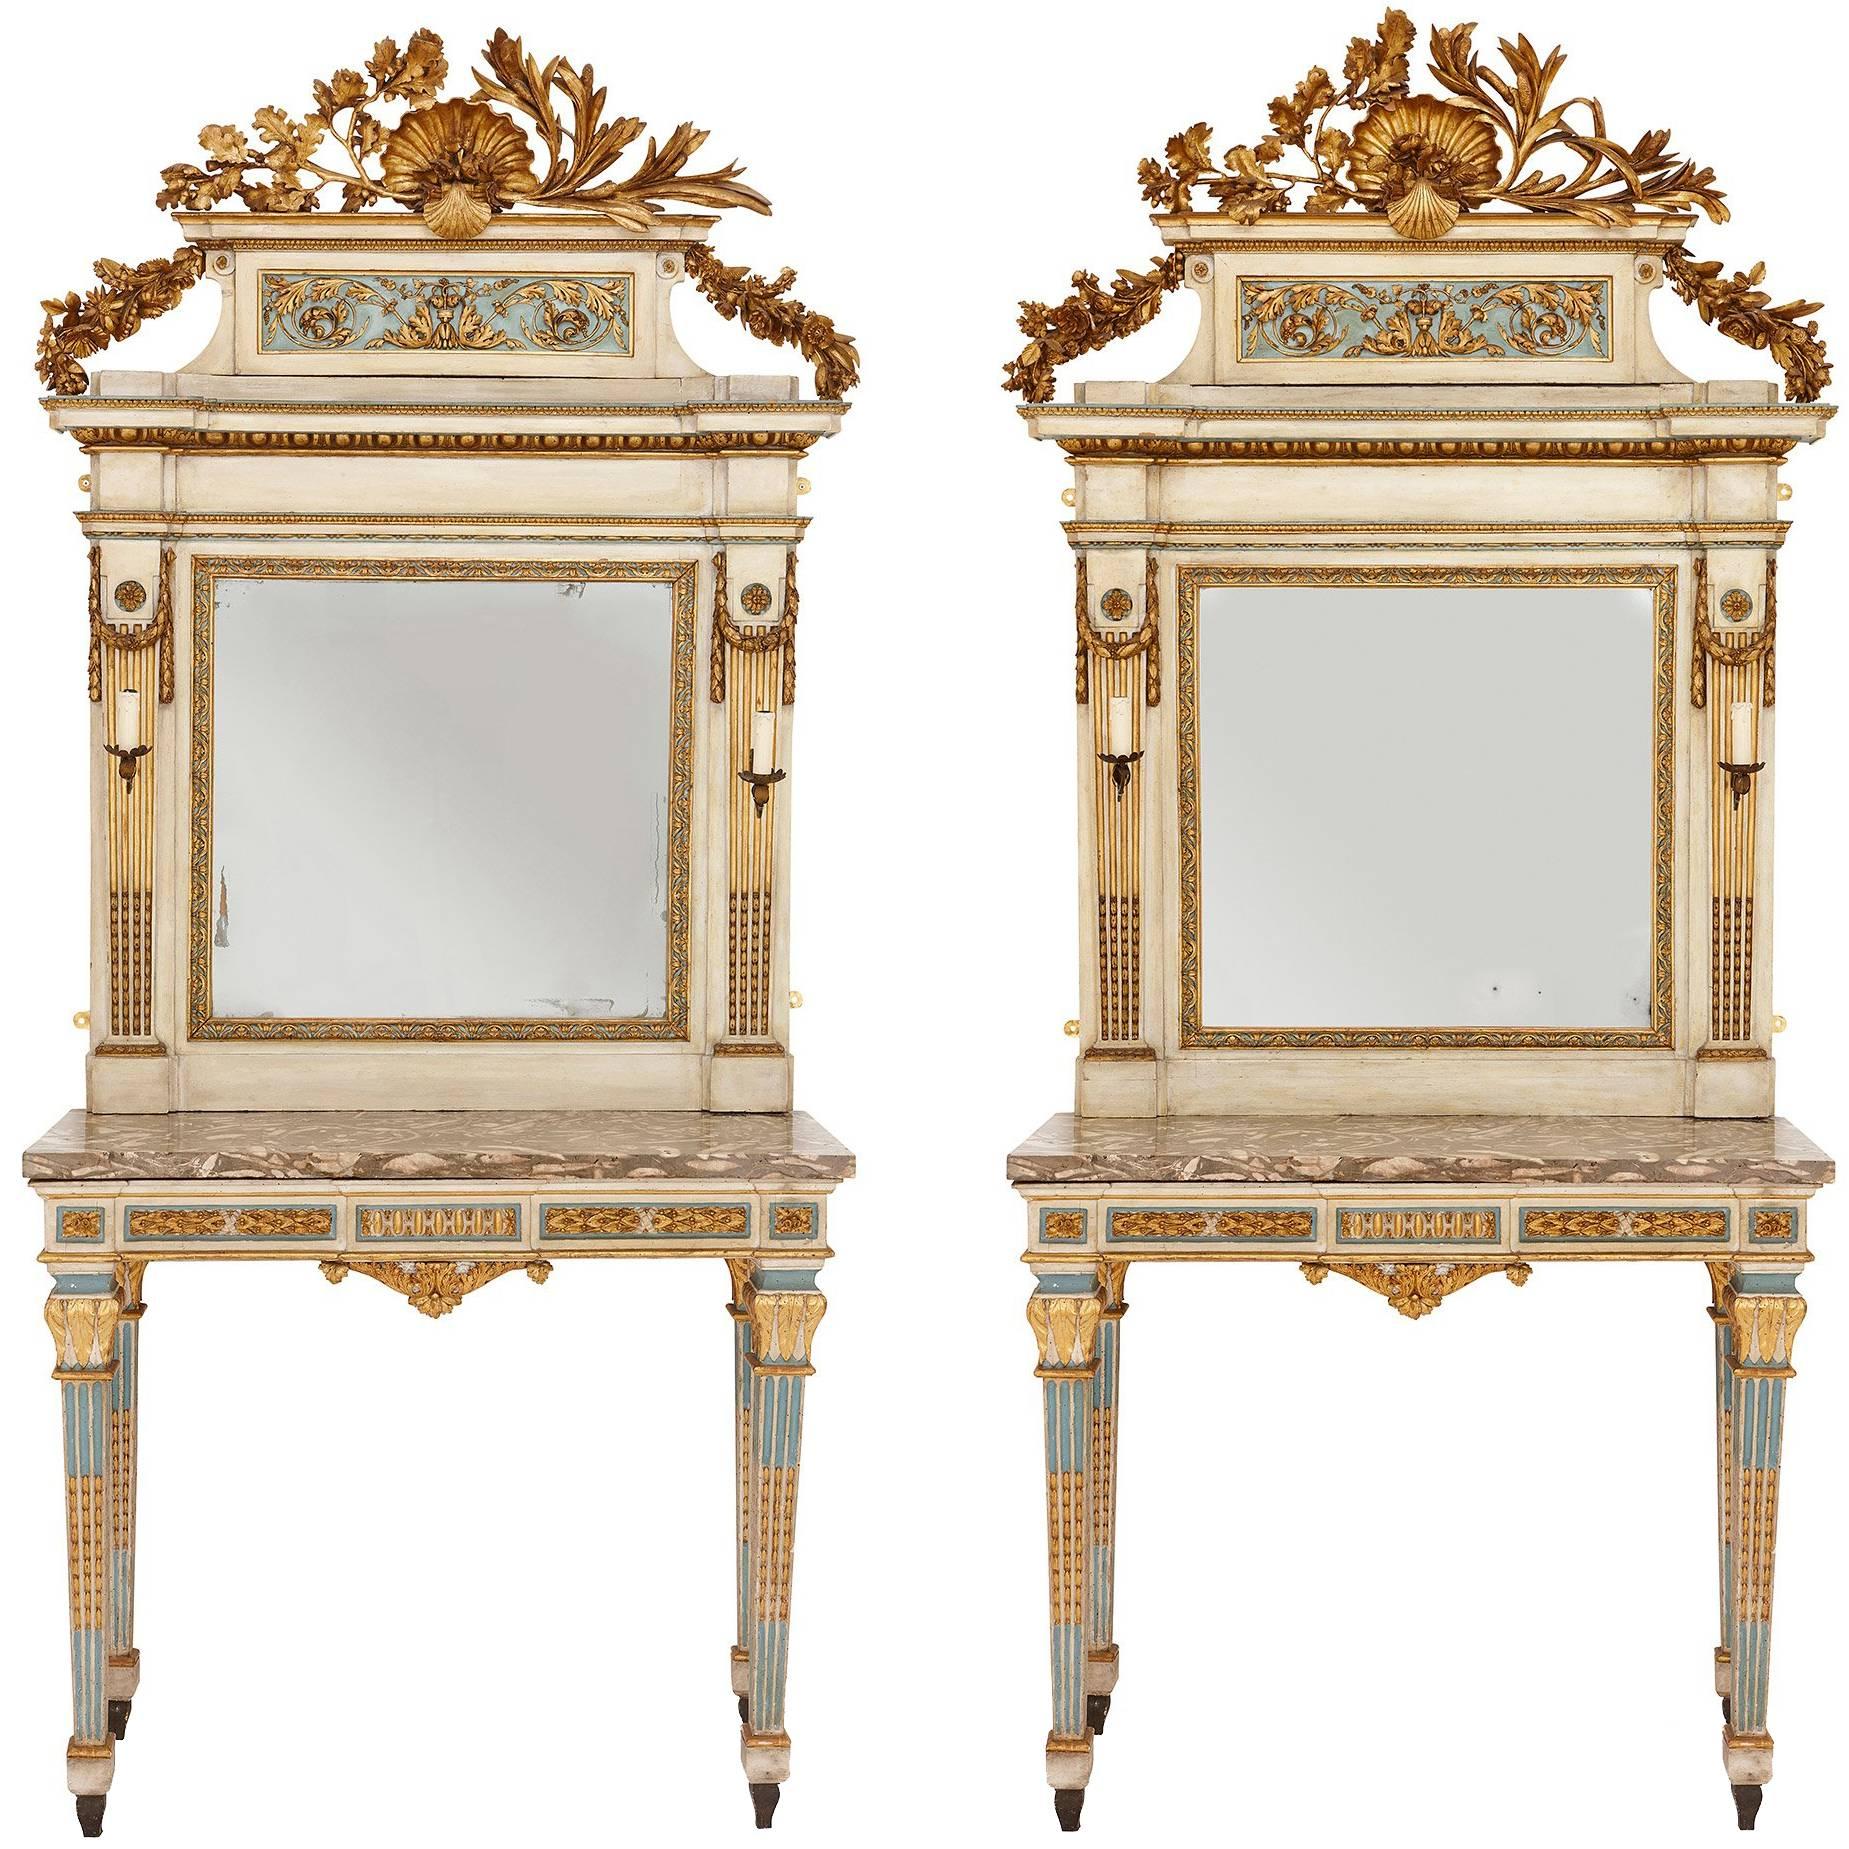 Pair of 18th Century Neoclassical Mirrored Console Tables